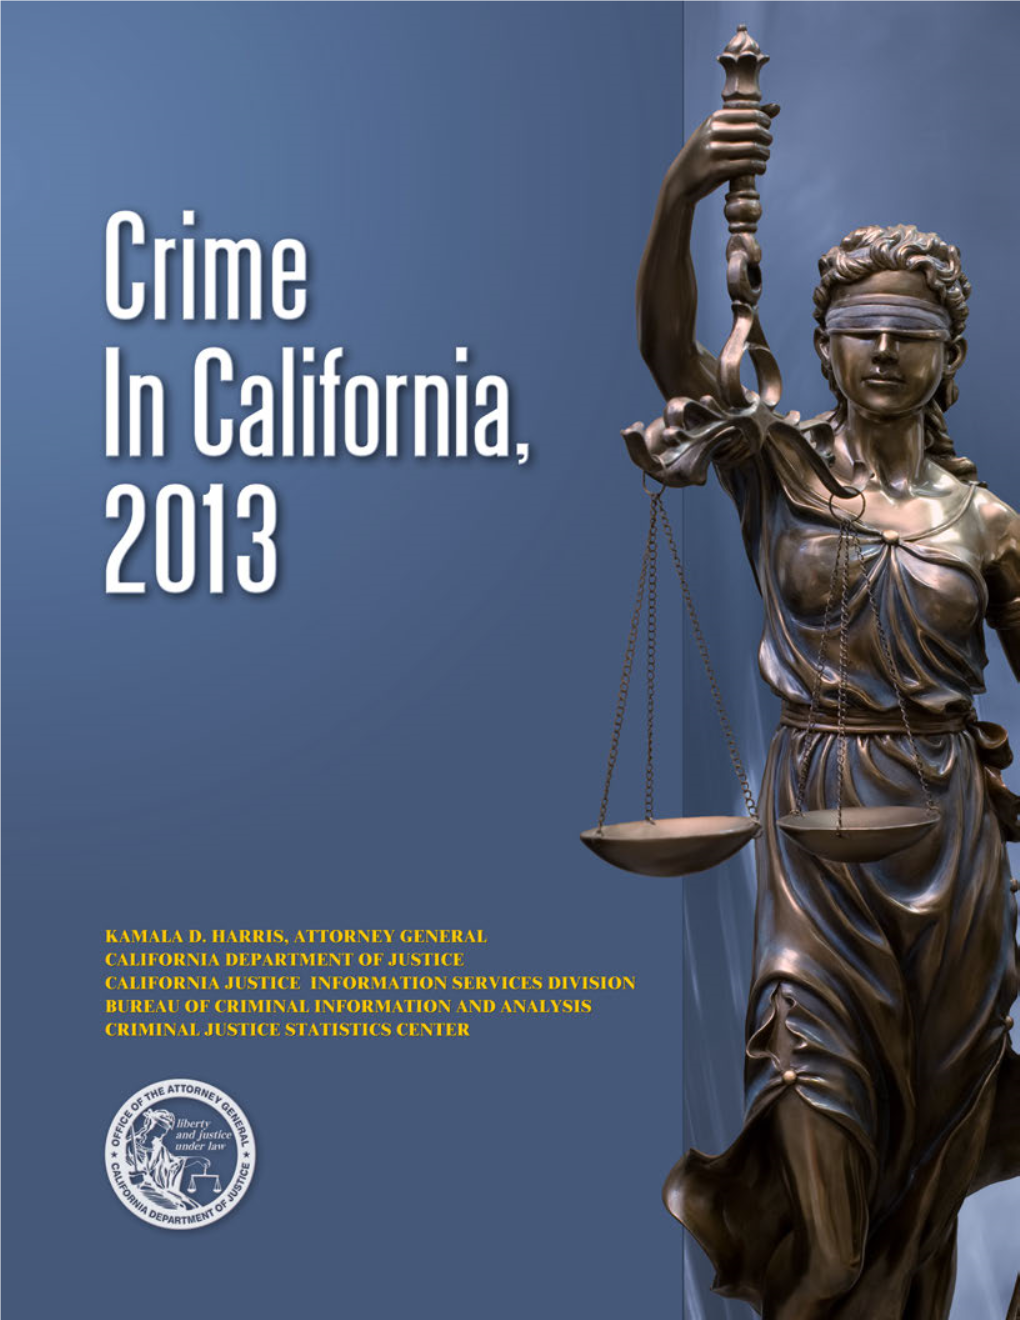 Crime in California, 2013 Presents an Overview of the Criminal Justice System in California